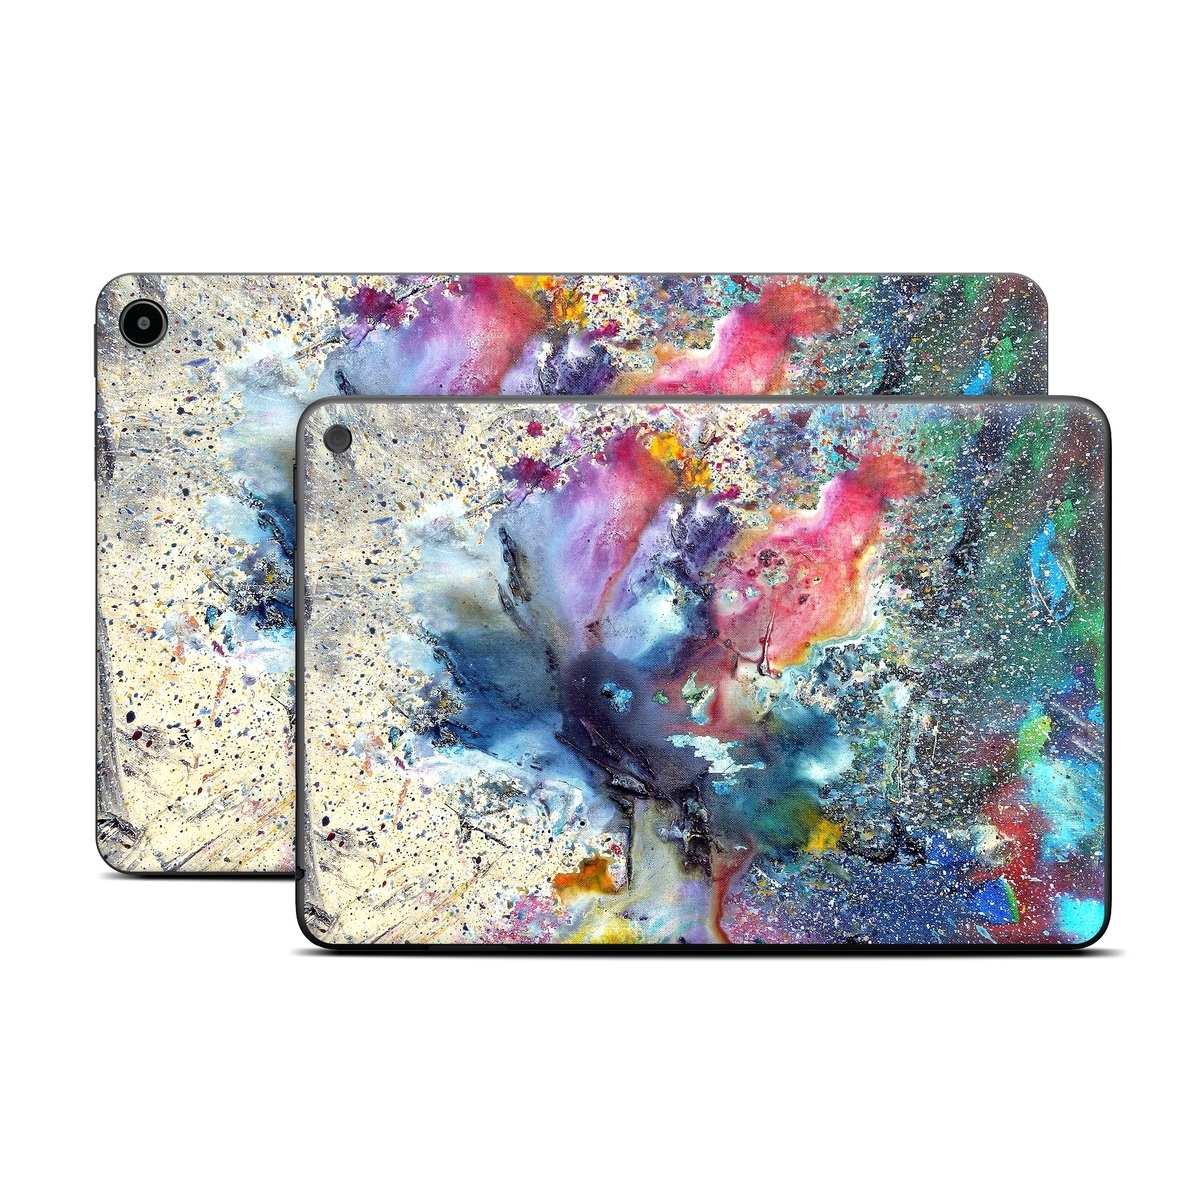 Amazon Fire Tablet Series Skin Skin design of Watercolor paint, Painting, Acrylic paint, Art, Modern art, Paint, Visual arts, Space, Colorfulness, Illustration, with gray, black, blue, red, pink colors